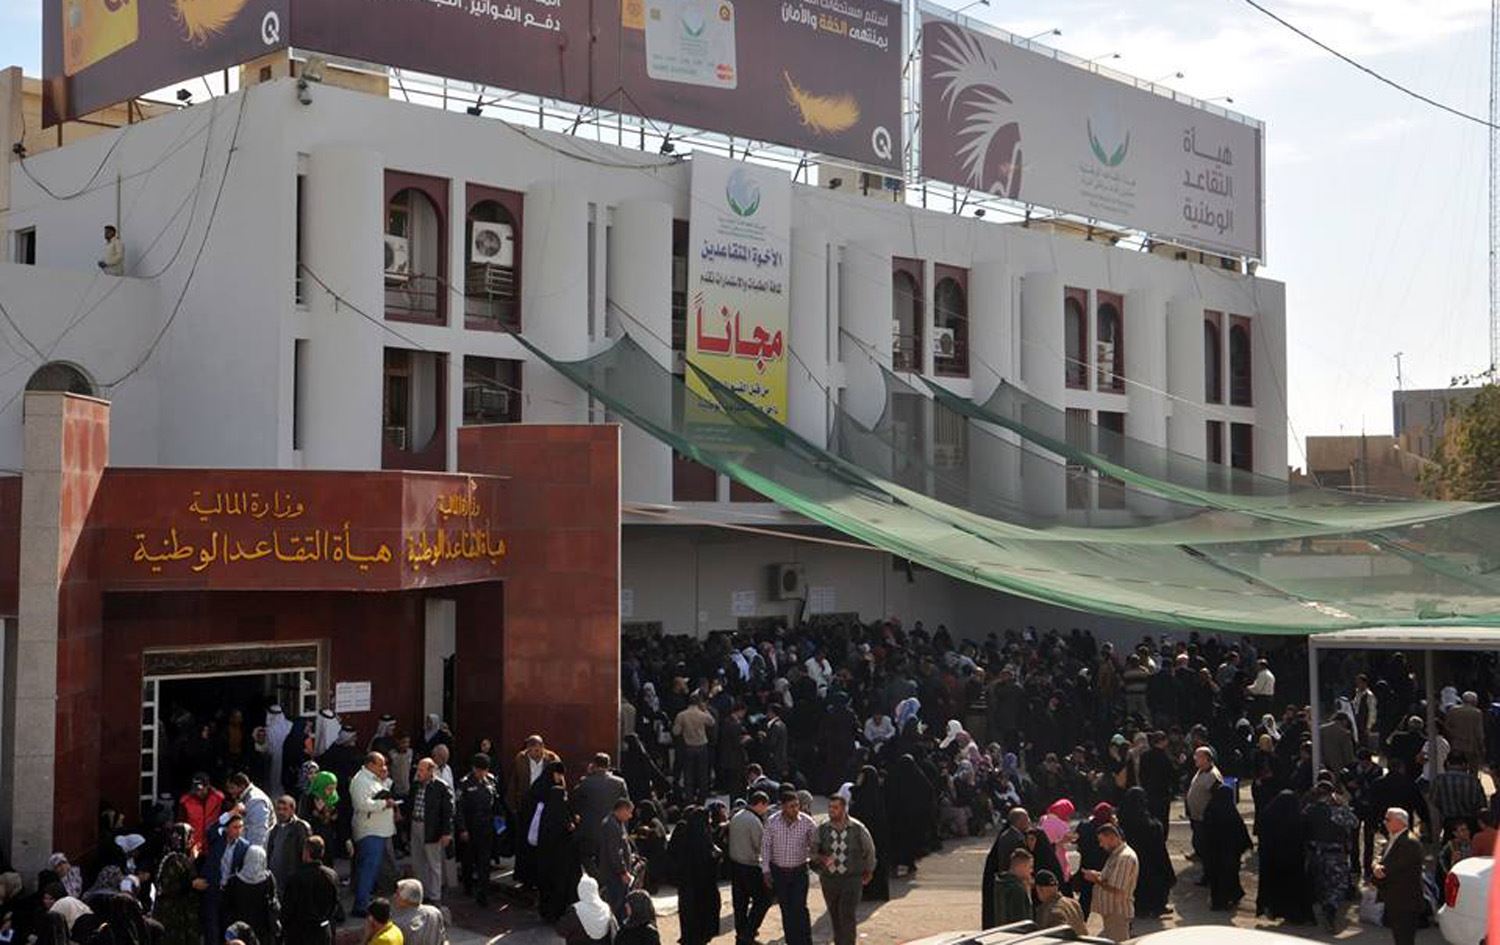 Bribery rates increase in retirement departments in Iraq